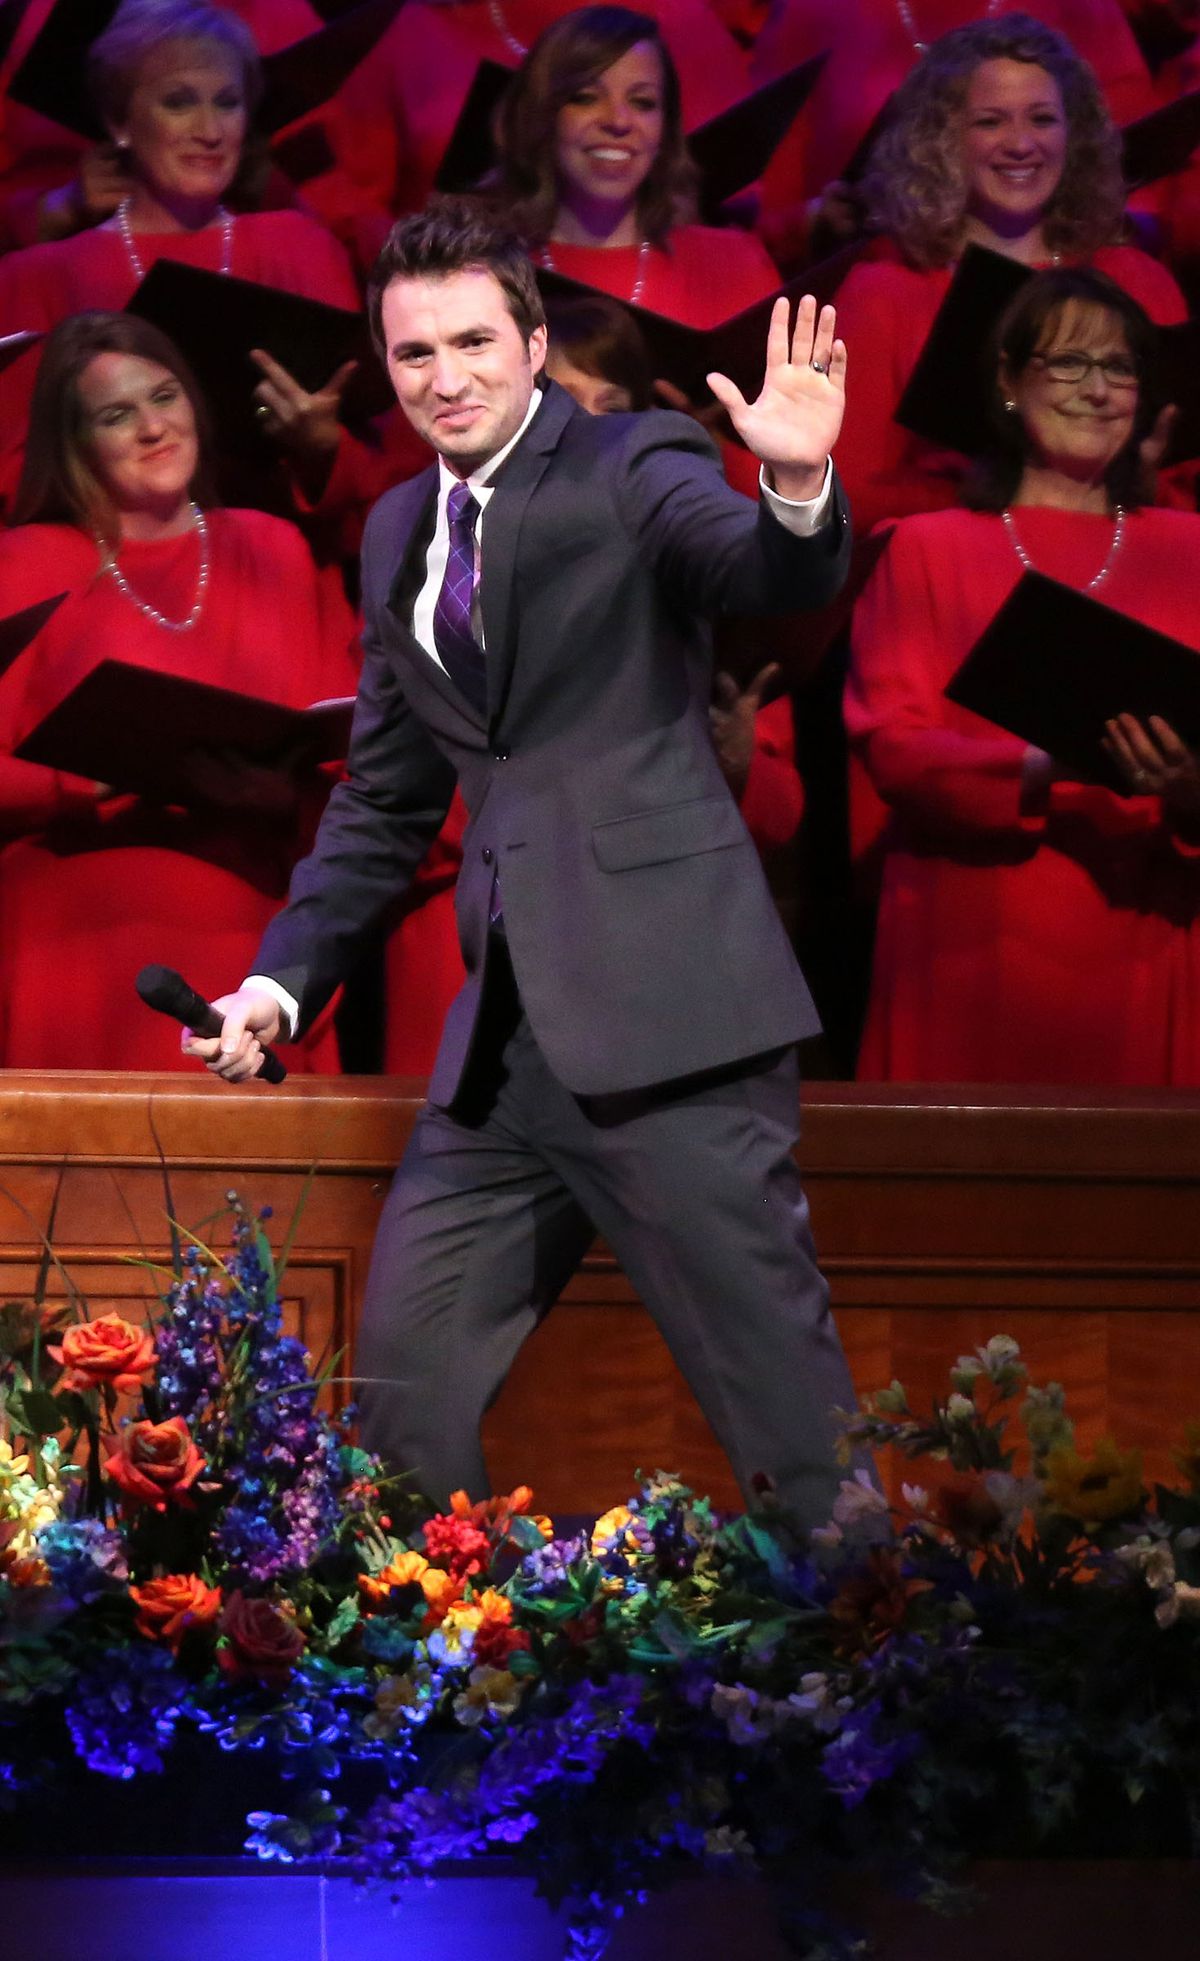 Nathan Pacheco walks off stage after performing with the Mormon Tabernacle Choir and Orchestra at Temple Square for a Pioneer Day concert at the Conference Center in Salt Lake City on Friday, July 19, 2013.